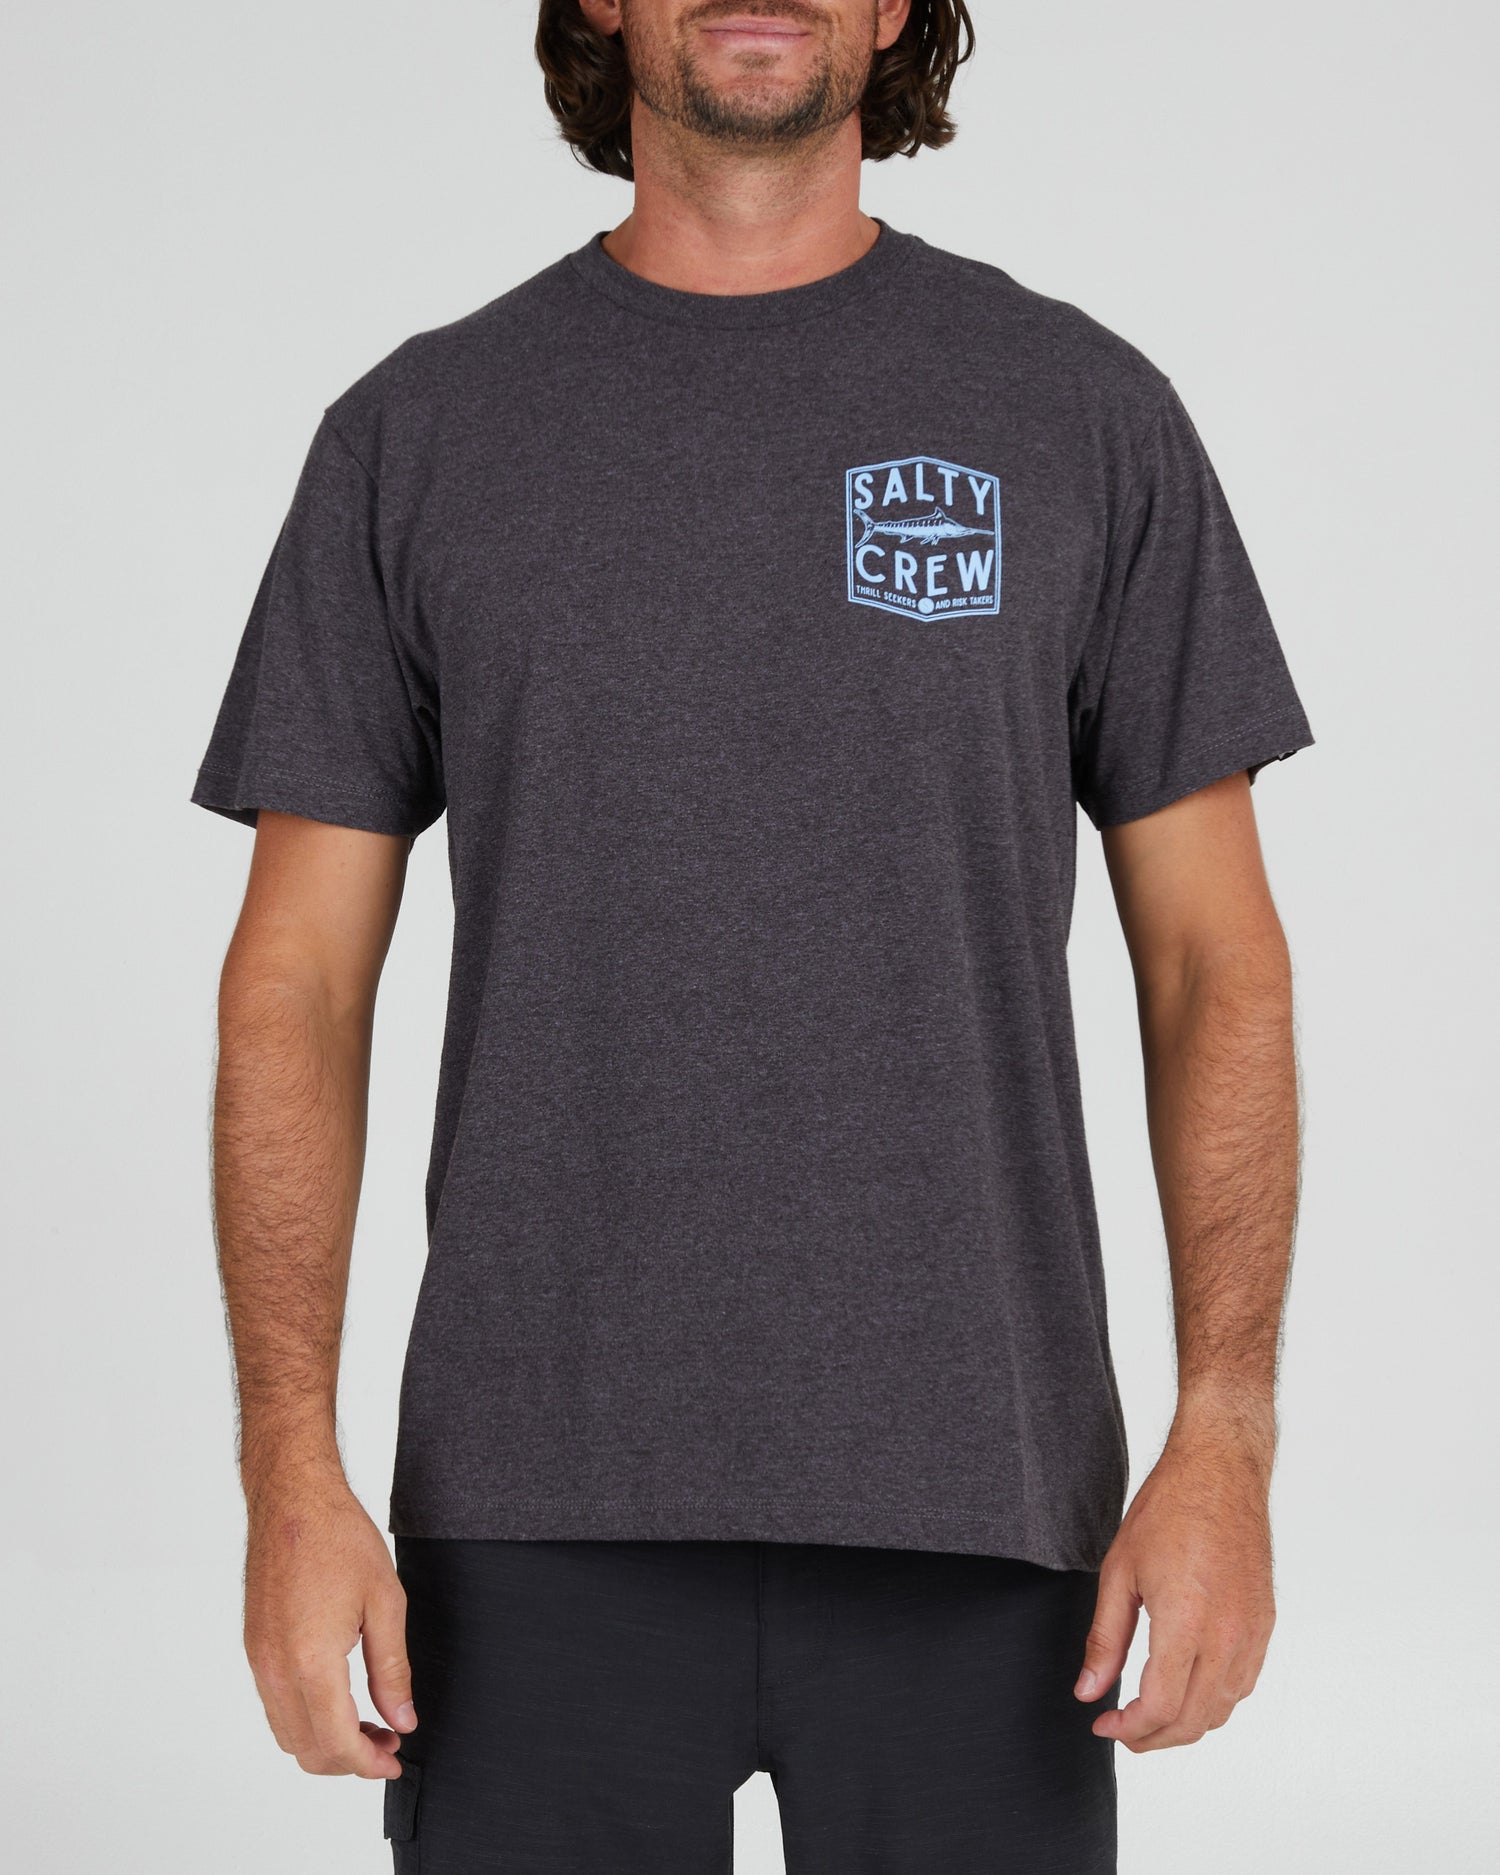 On body front of the Fishery Charcoal Heather S/S Standard Tee